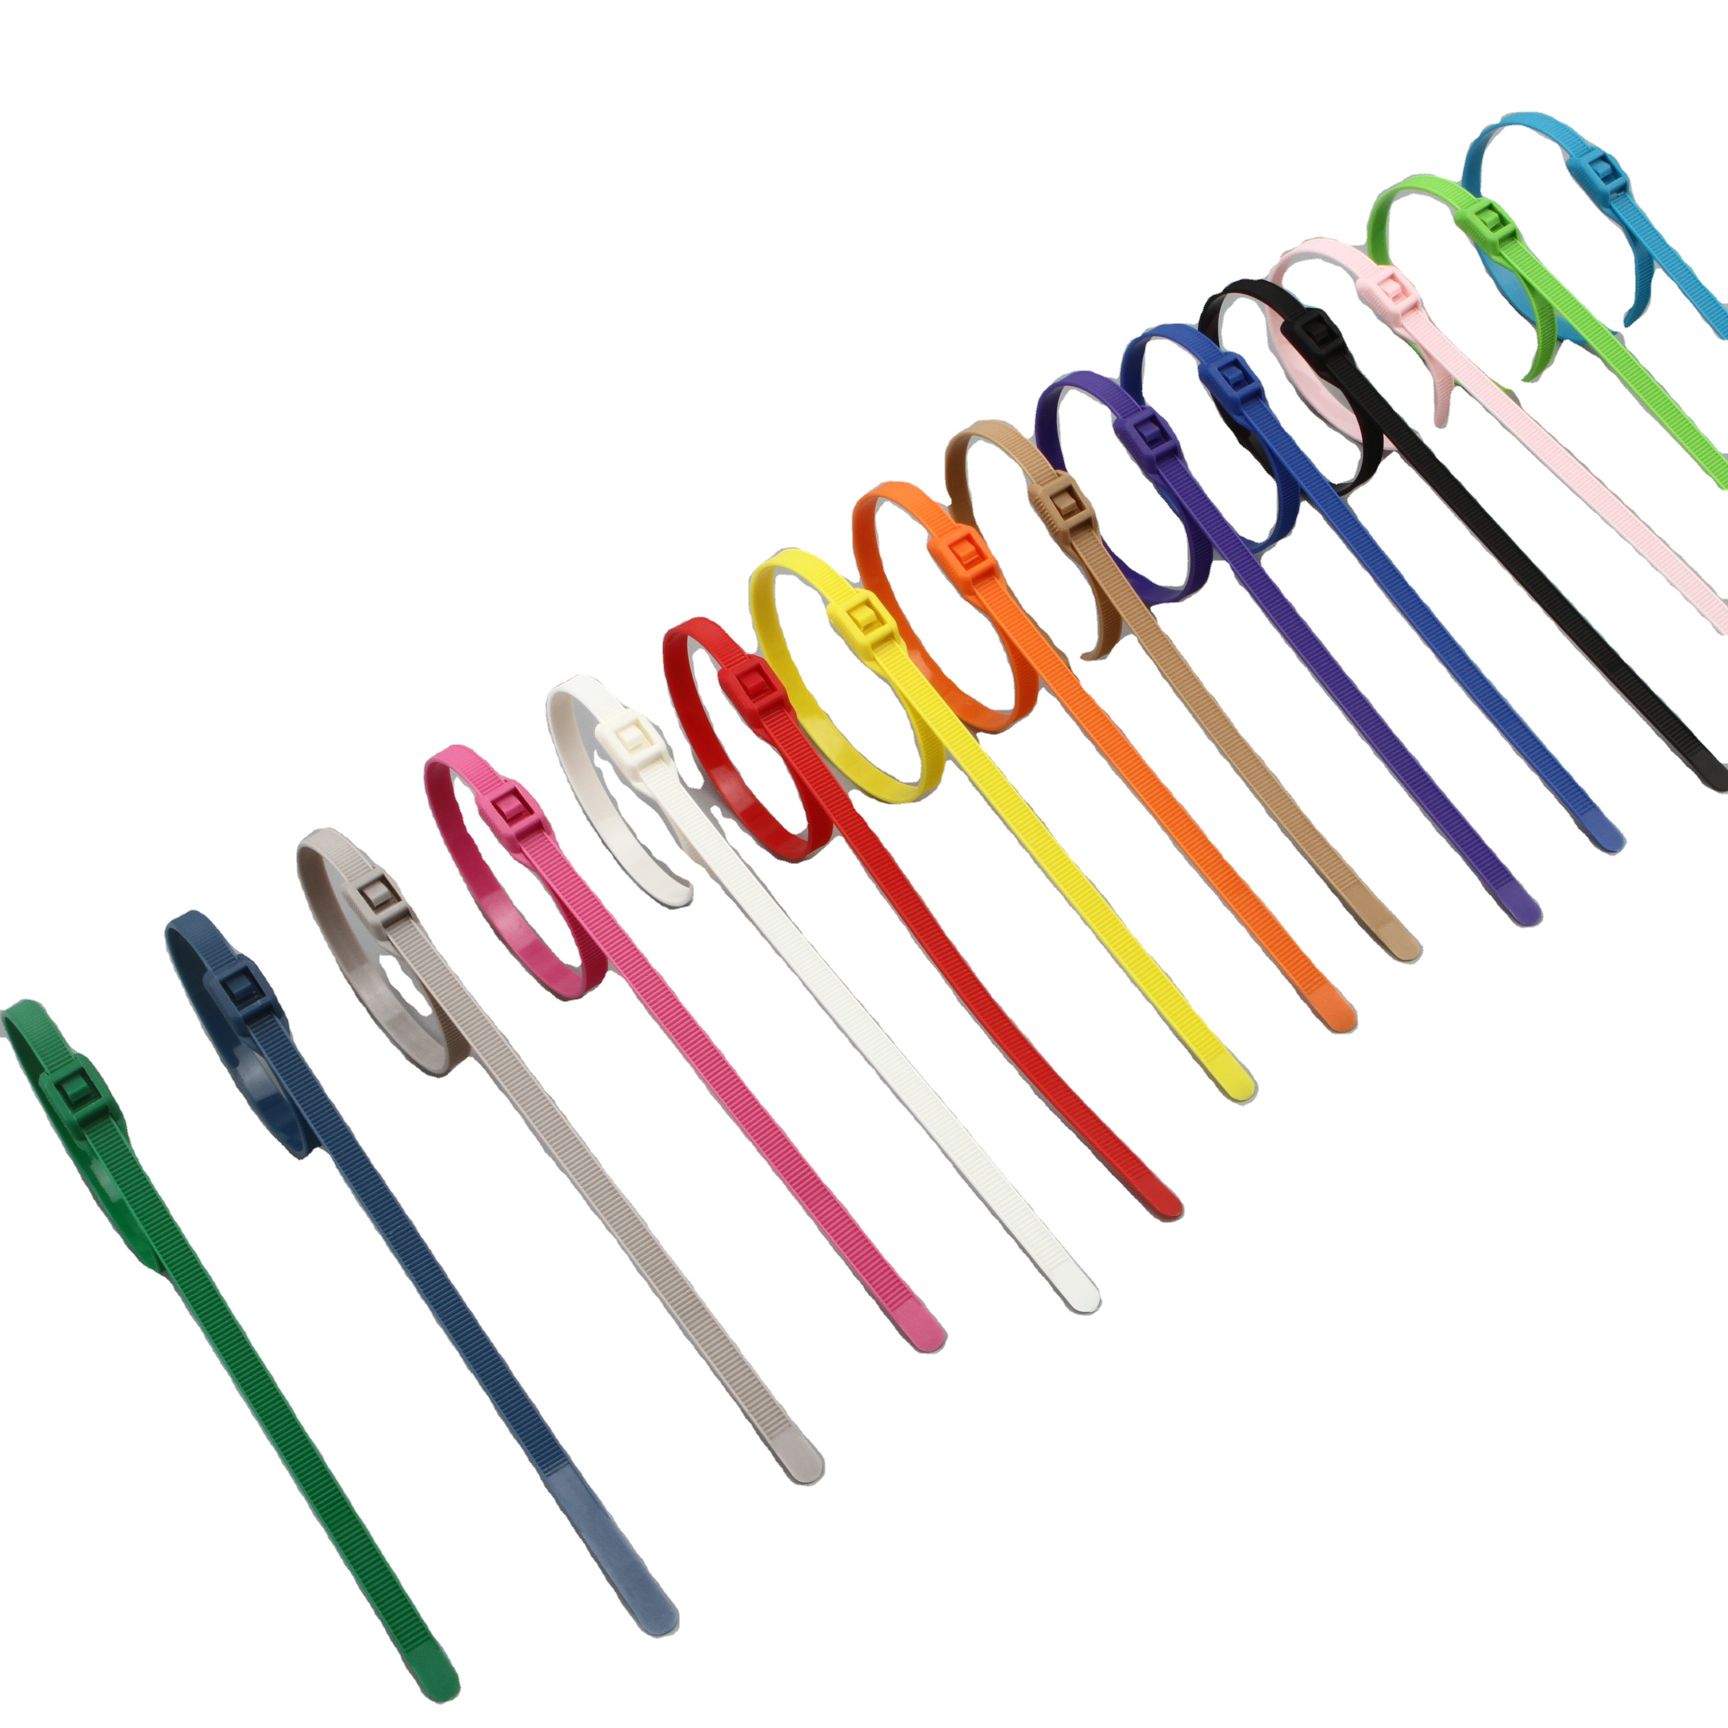 Anti disassembly (lead sealed) nylon cable tie - 5